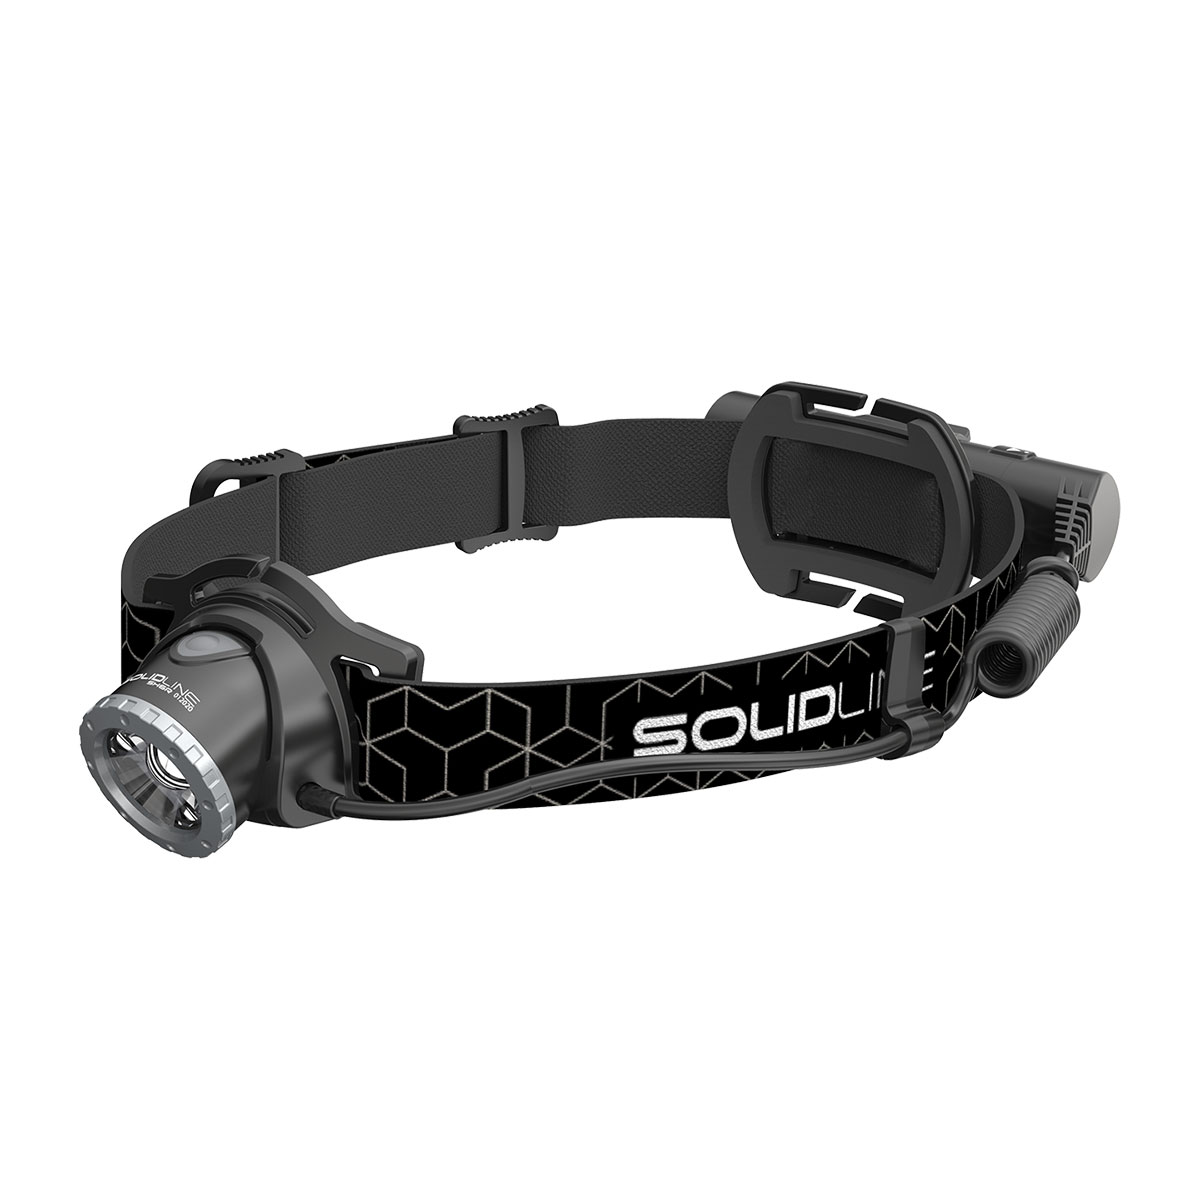 SOLIDLINE SHR6 260LM RECHARGEABLE 